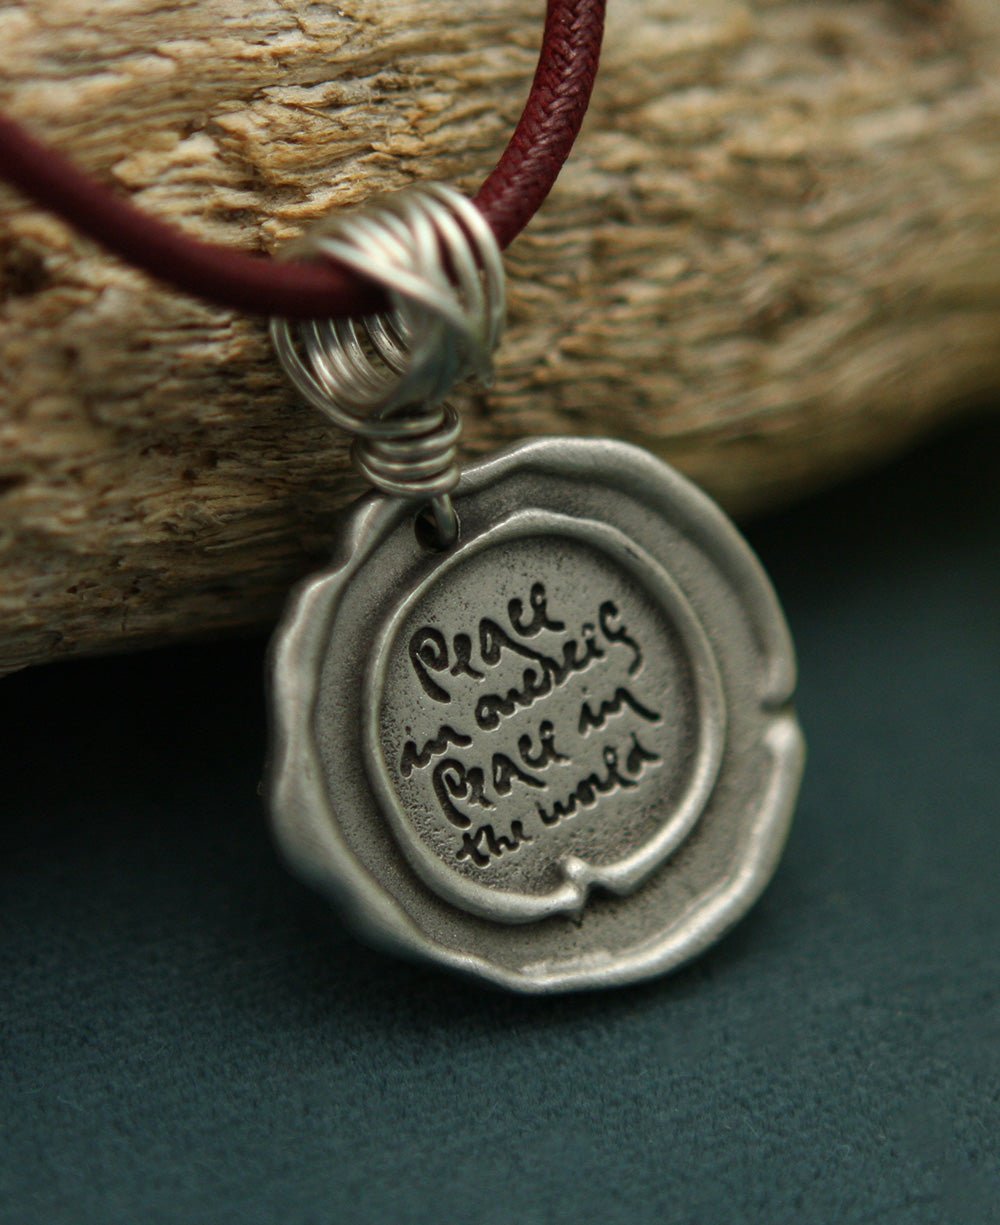 Thich Nhat Hanh Peace Quote Pendant Necklace - Necklaces